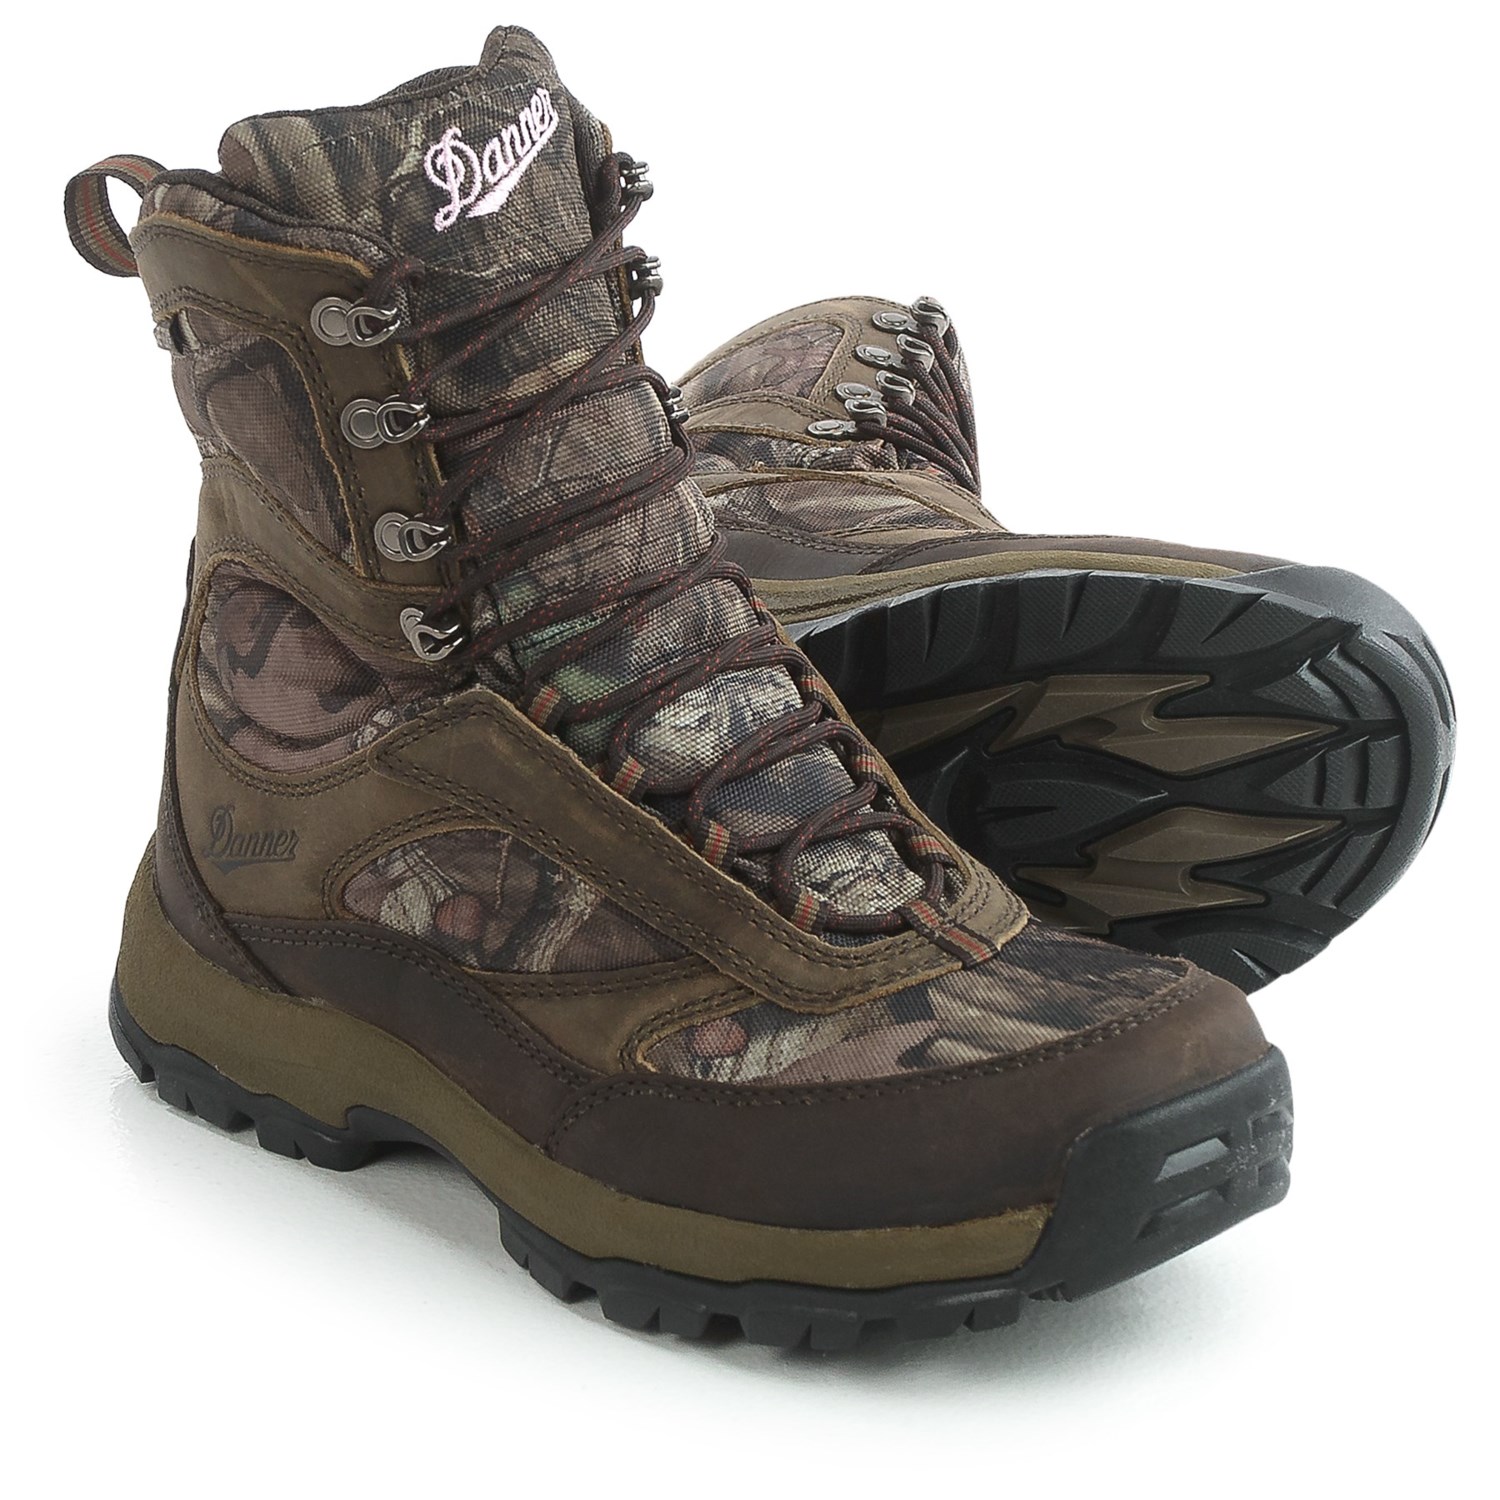 Danner High Ground Gore-Tex® 8” Hunting Boots – Waterproof (For Women)